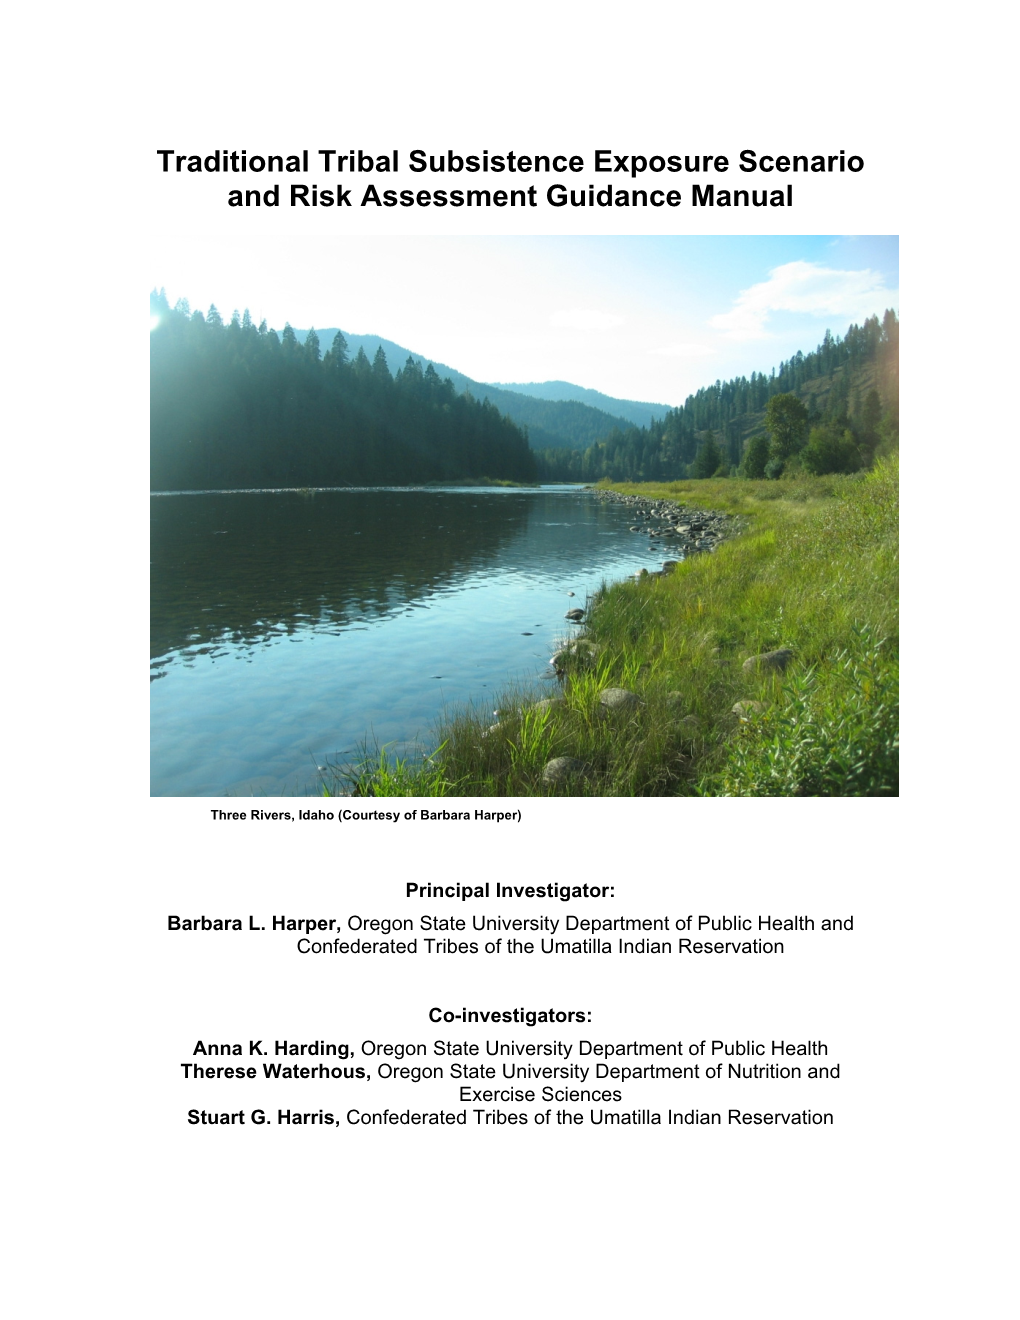 Traditional Tribal Subsistence Exposure Scenario and Risk Assessment Guidance Manual and Risk Assessment Guidance Manual